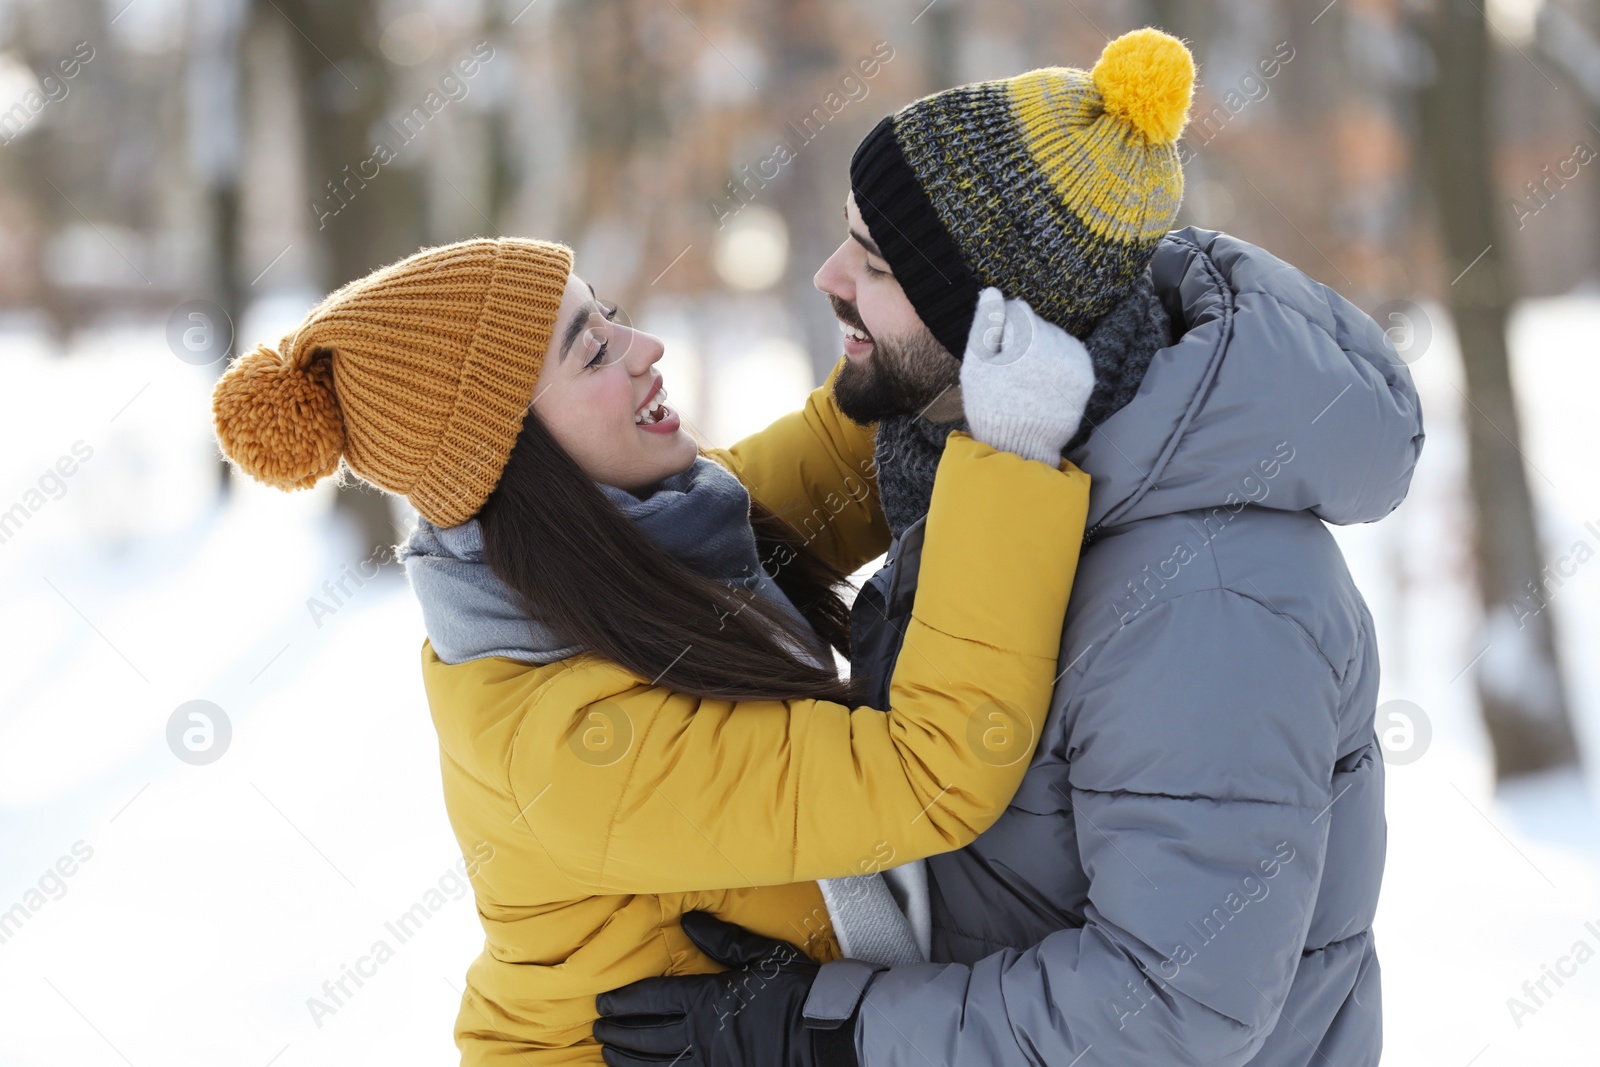 Photo of Happy young couple having fun outdoors on winter day